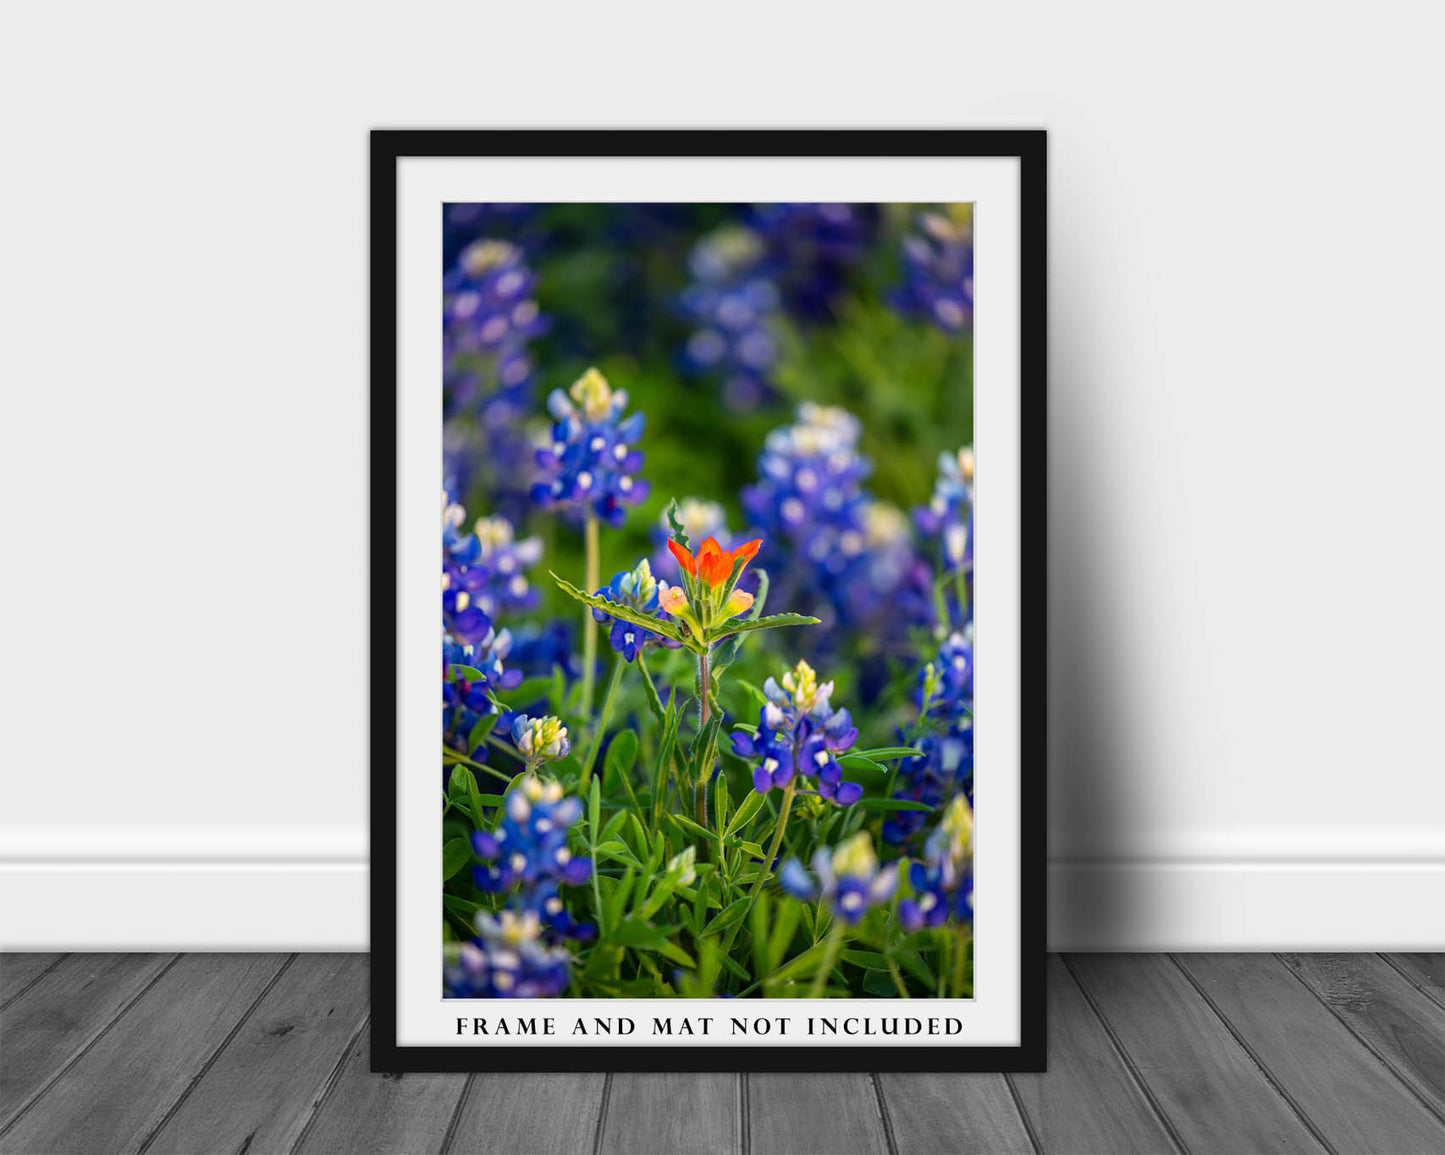 Wildflower Photography Print (Not Framed) Vertical Picture of Solitary Indian Paintbrush in Bluebonnets on Spring Day in Texas Floral Wall Art Flower Decor